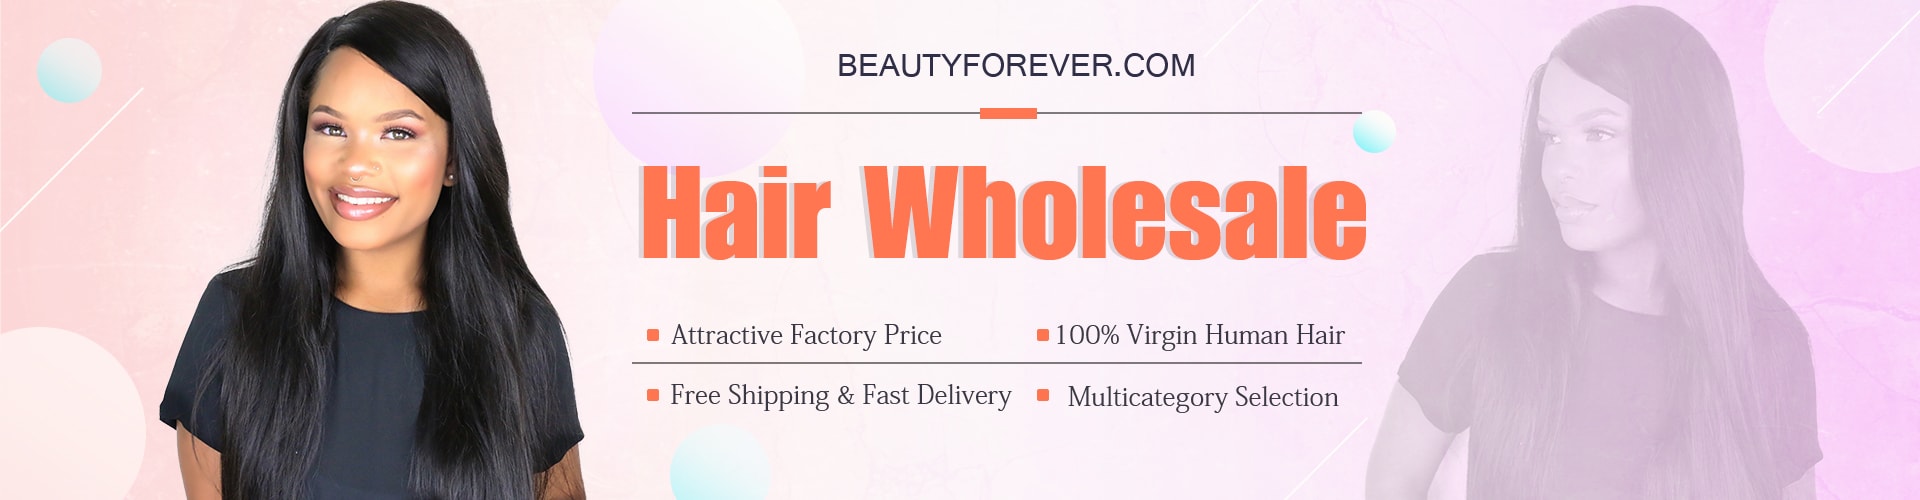 wholesale beauty forever hair